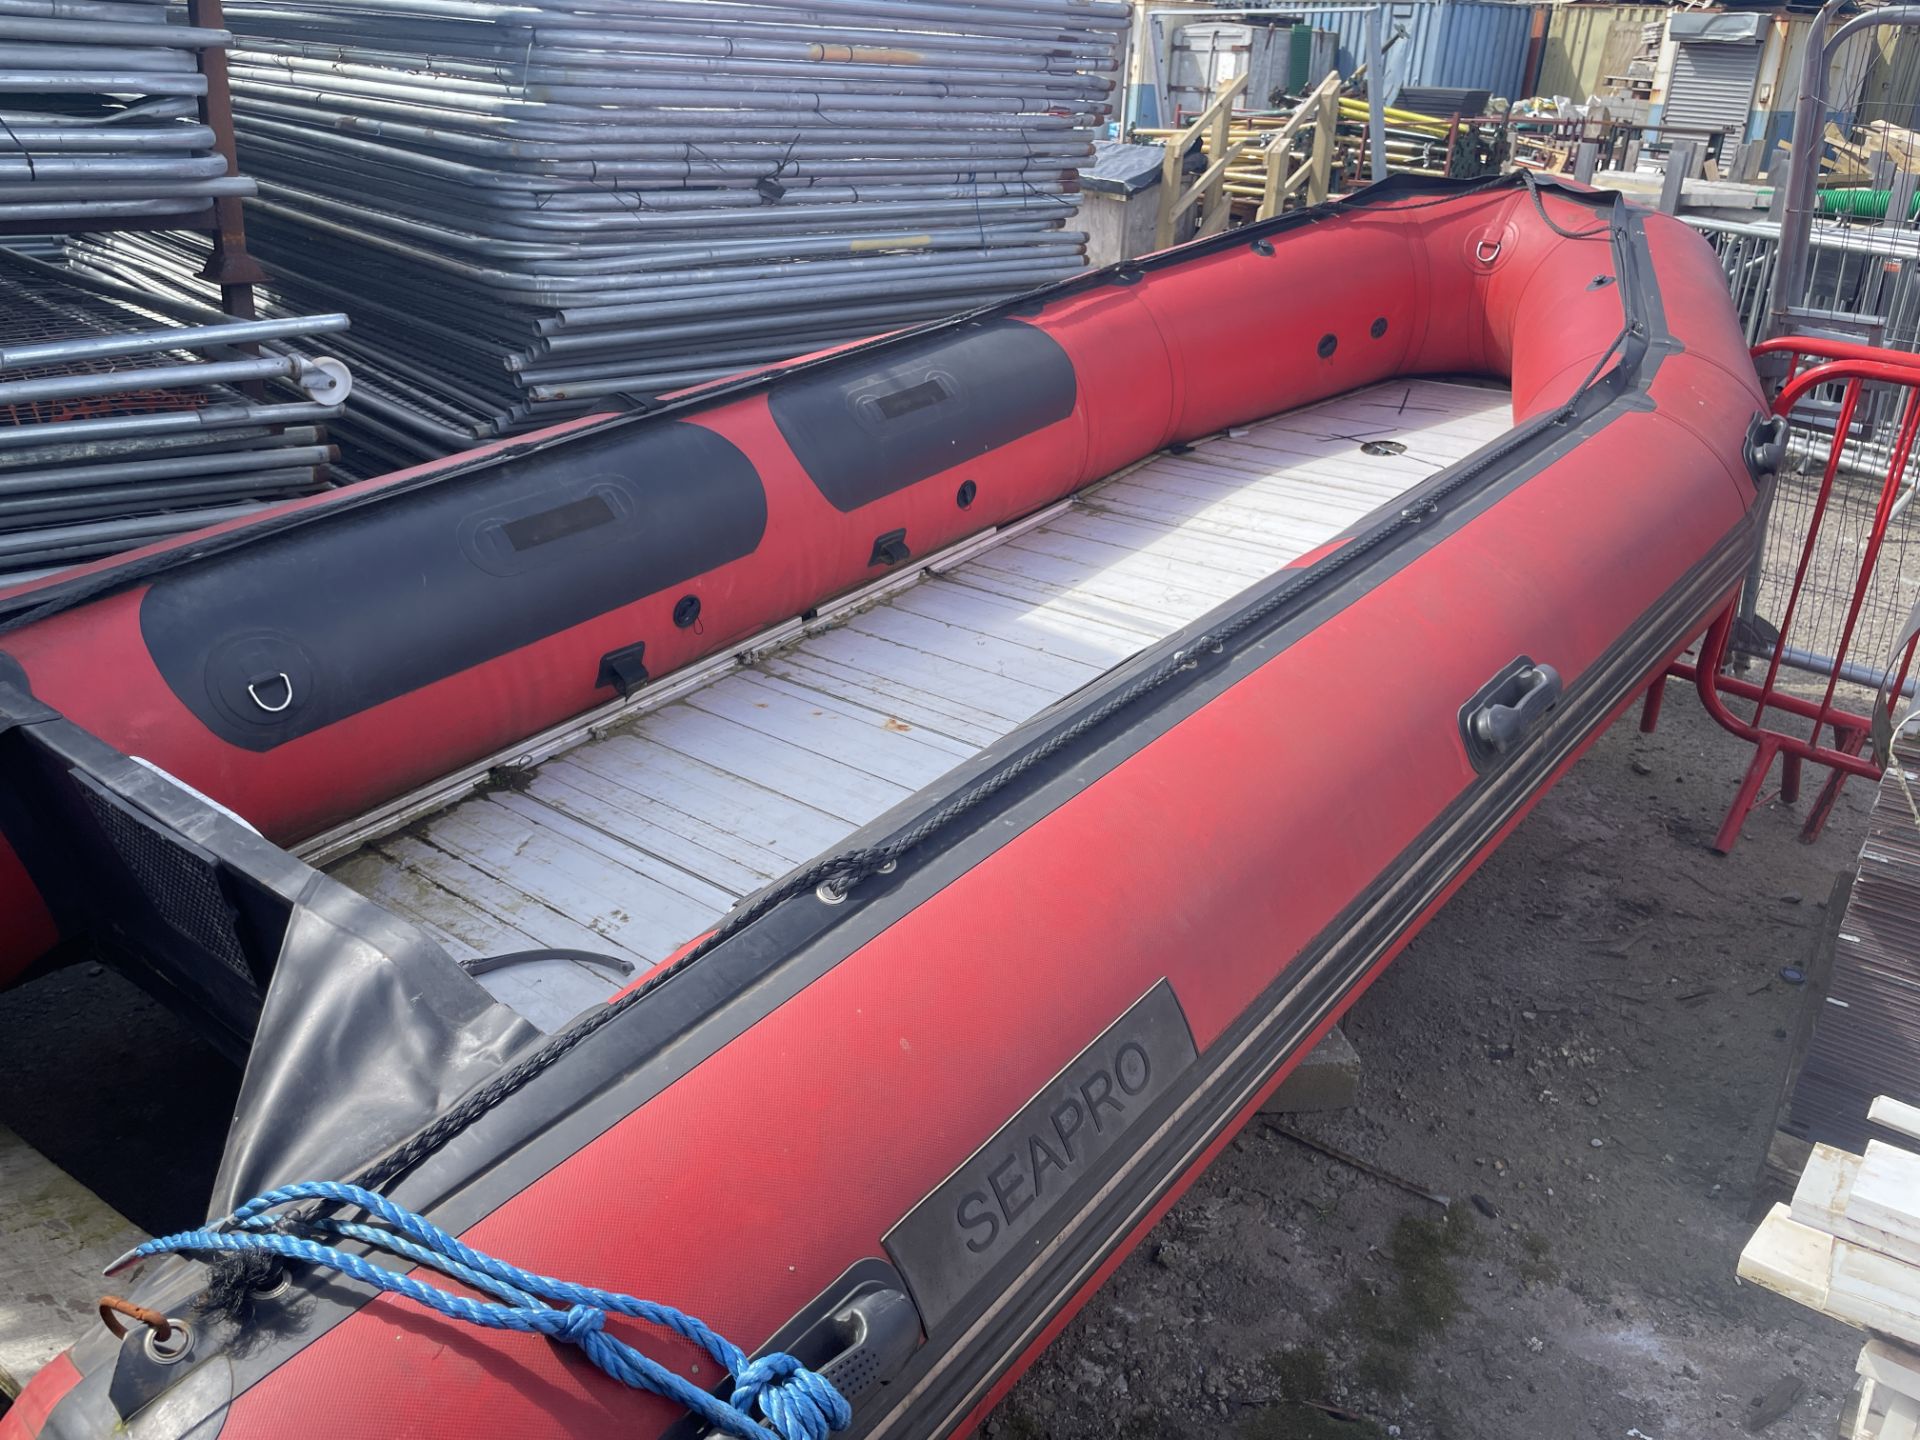 Serpro SEAPRO BH470HDD INFLATABLE BOAT, CIN SKI-BHG 07 E314, 4.6m long overall, with single axle - Image 4 of 5